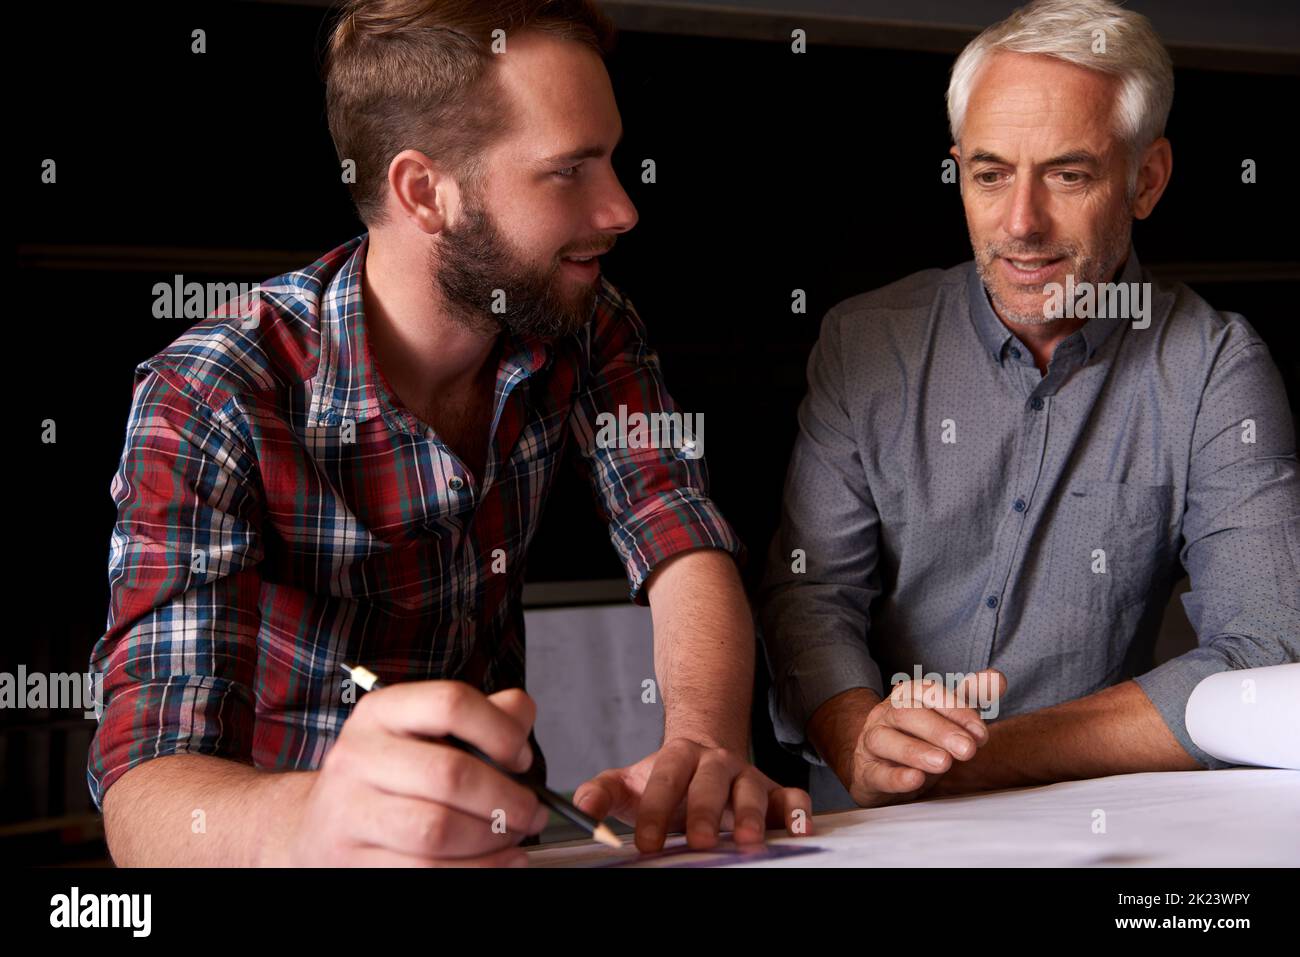 He had the best mentor. two architects working together on a building project. Stock Photo